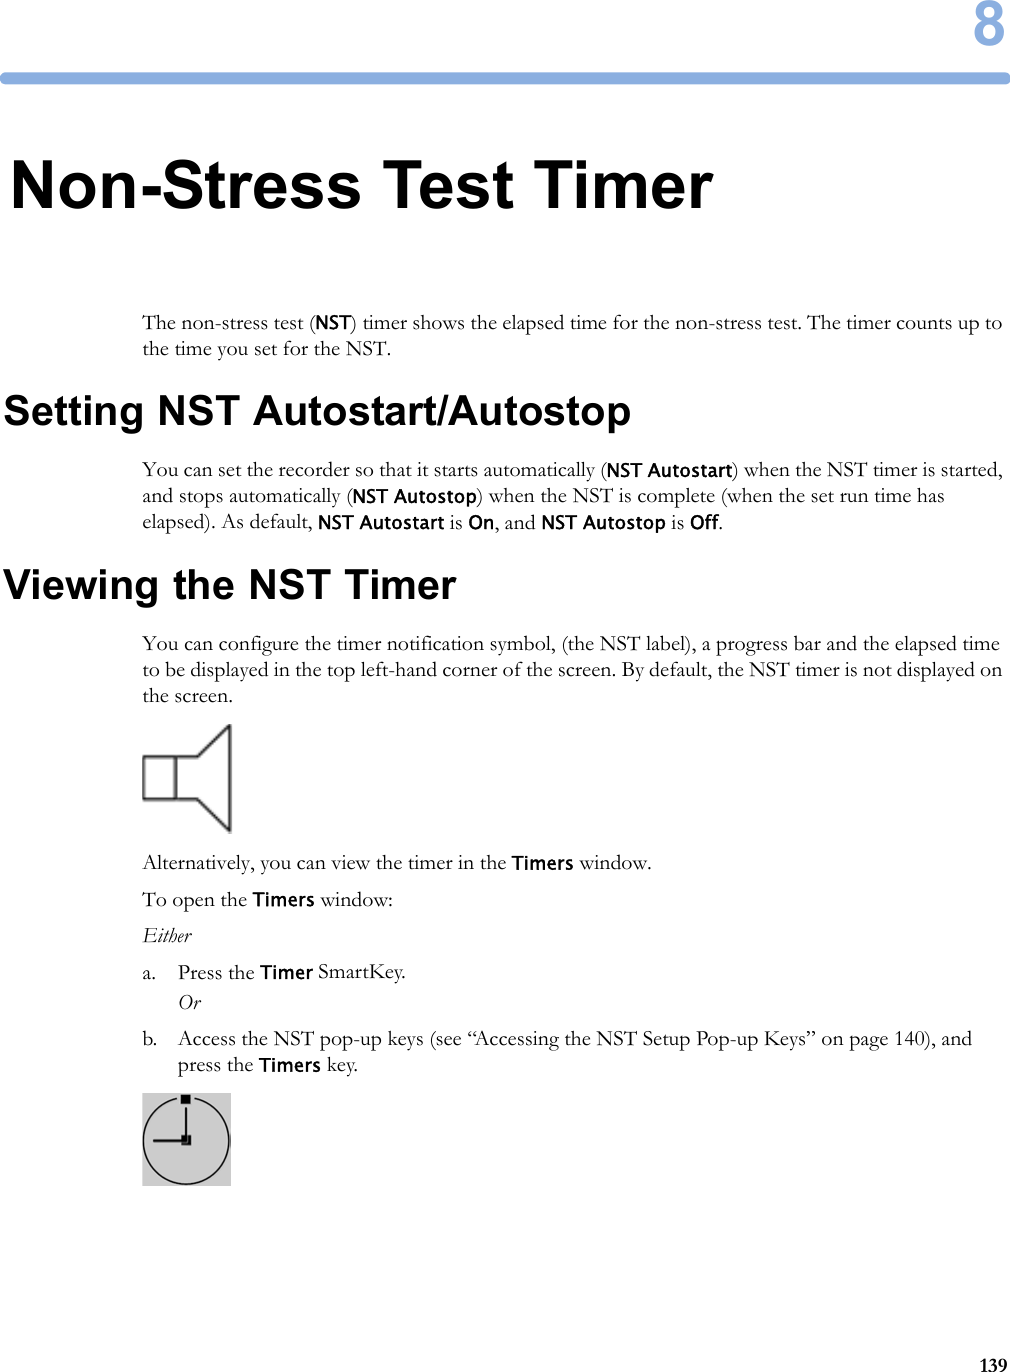 81398Non-Stress Test TimerThe non-stress test (NST) timer shows the elapsed time for the non-stress test. The timer counts up to the time you set for the NST.Setting NST Autostart/AutostopYou can set the recorder so that it starts automatically (NST Autostart) when the NST timer is started, and stops automatically (NST Autostop) when the NST is complete (when the set run time has elapsed). As default, NST Autostart is On, and NST Autostop is Off.Viewing the NST TimerYou can configure the timer notification symbol, (the NST label), a progress bar and the elapsed time to be displayed in the top left-hand corner of the screen. By default, the NST timer is not displayed on the screen.Alternatively, you can view the timer in the Timers window.To open the Timers window:Eithera. Press the Timer SmartKey.Orb. Access the NST pop-up keys (see “Accessing the NST Setup Pop-up Keys” on page 140), and press the Timers key.